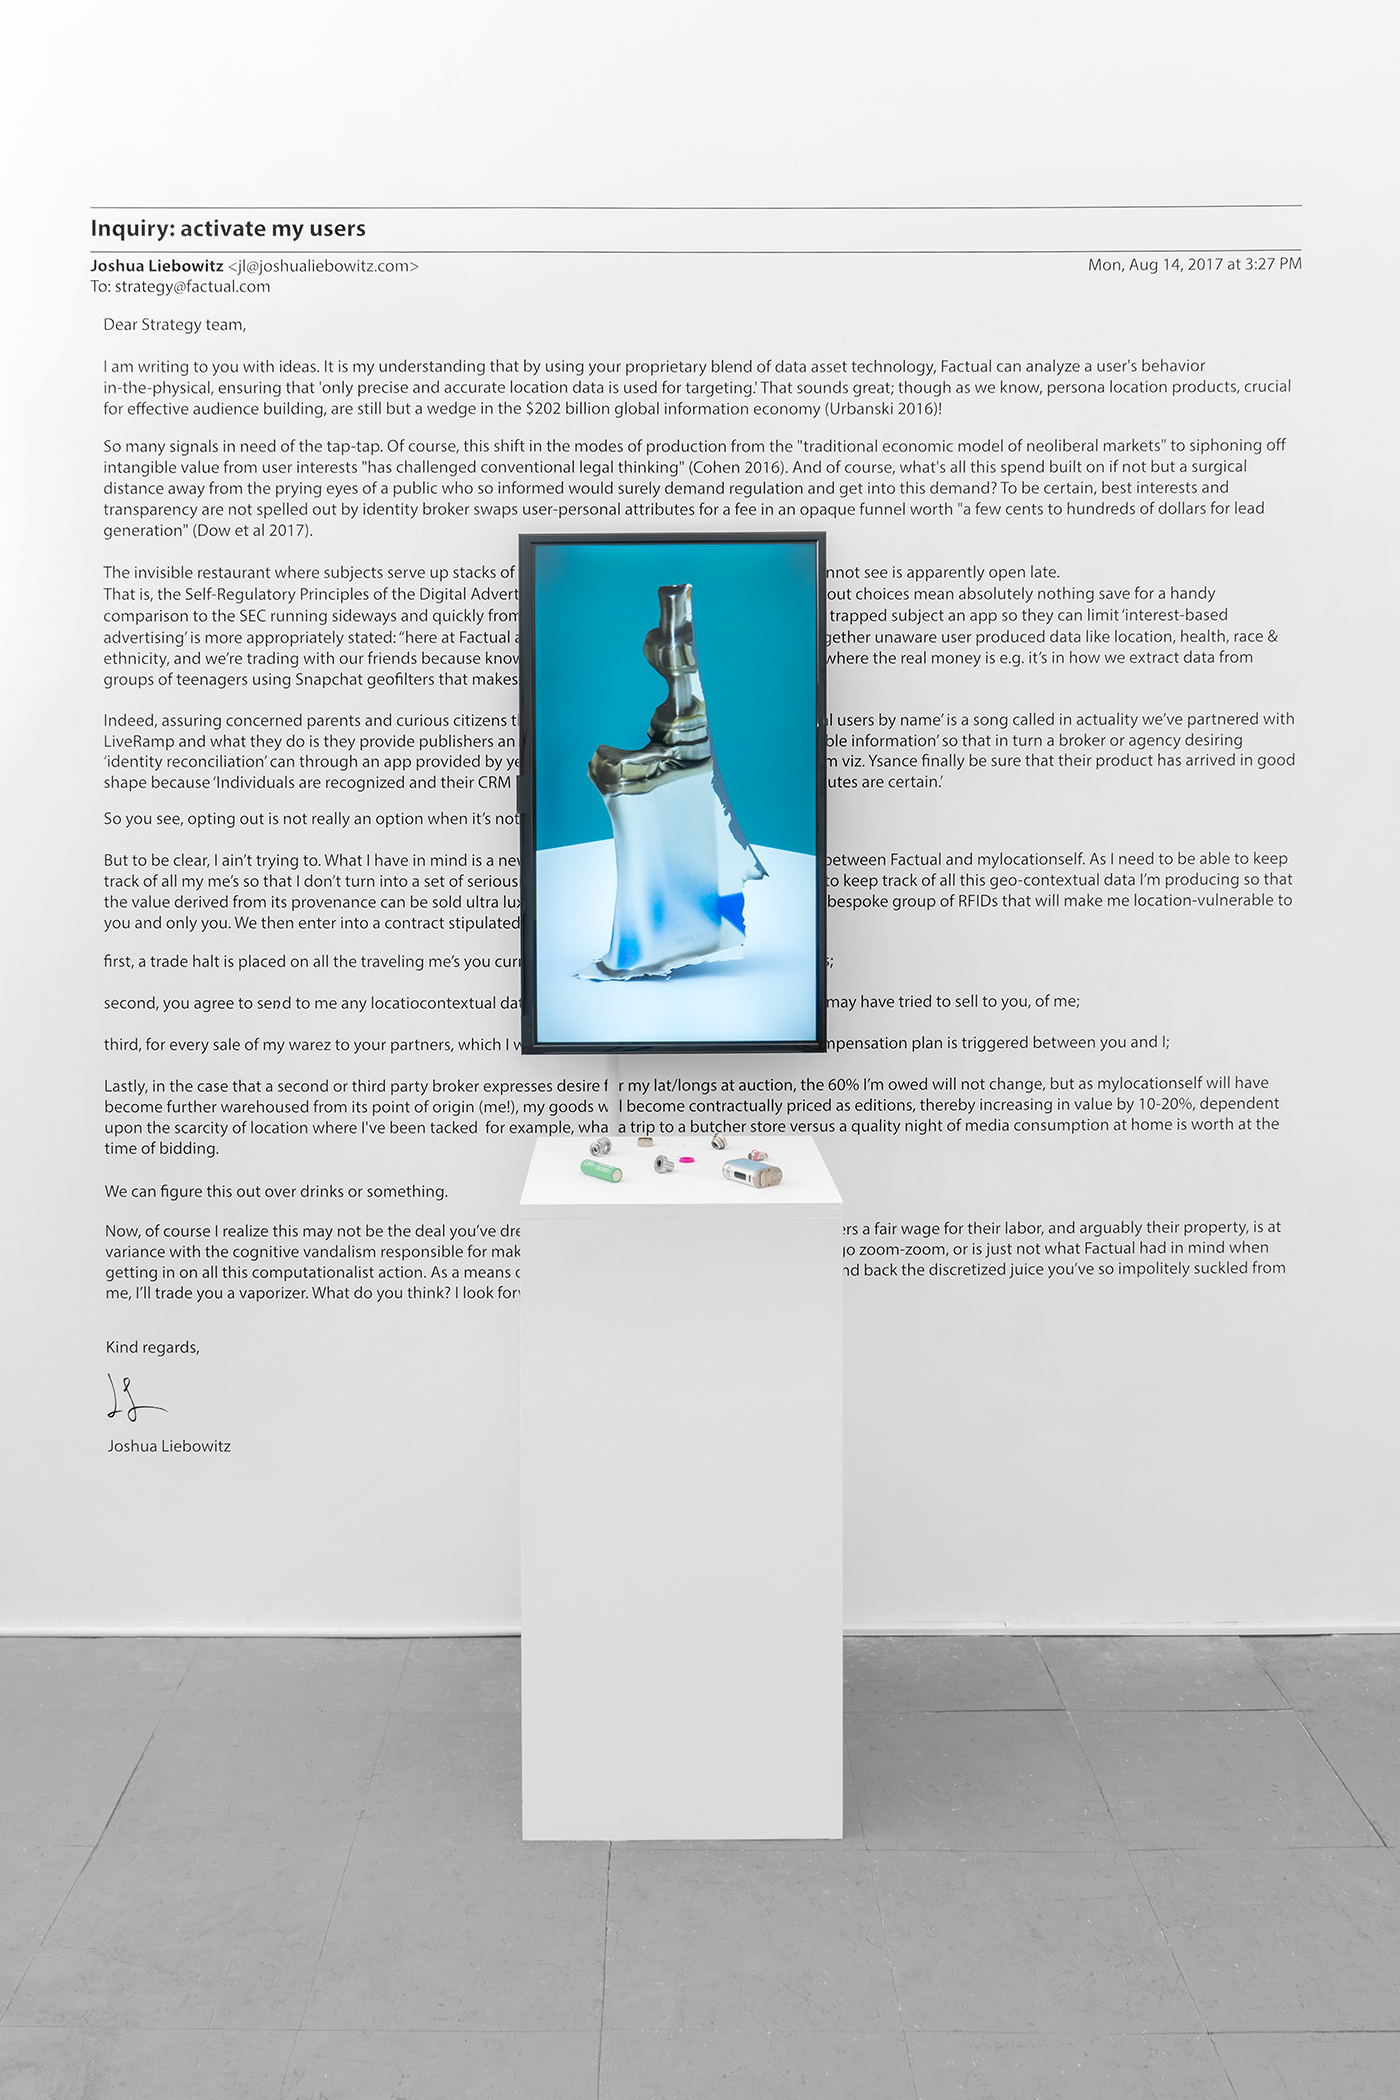 Assemblage of vaporizer parts on pedestal, digital still on monitor, and vinyl text of electronic mail on wall